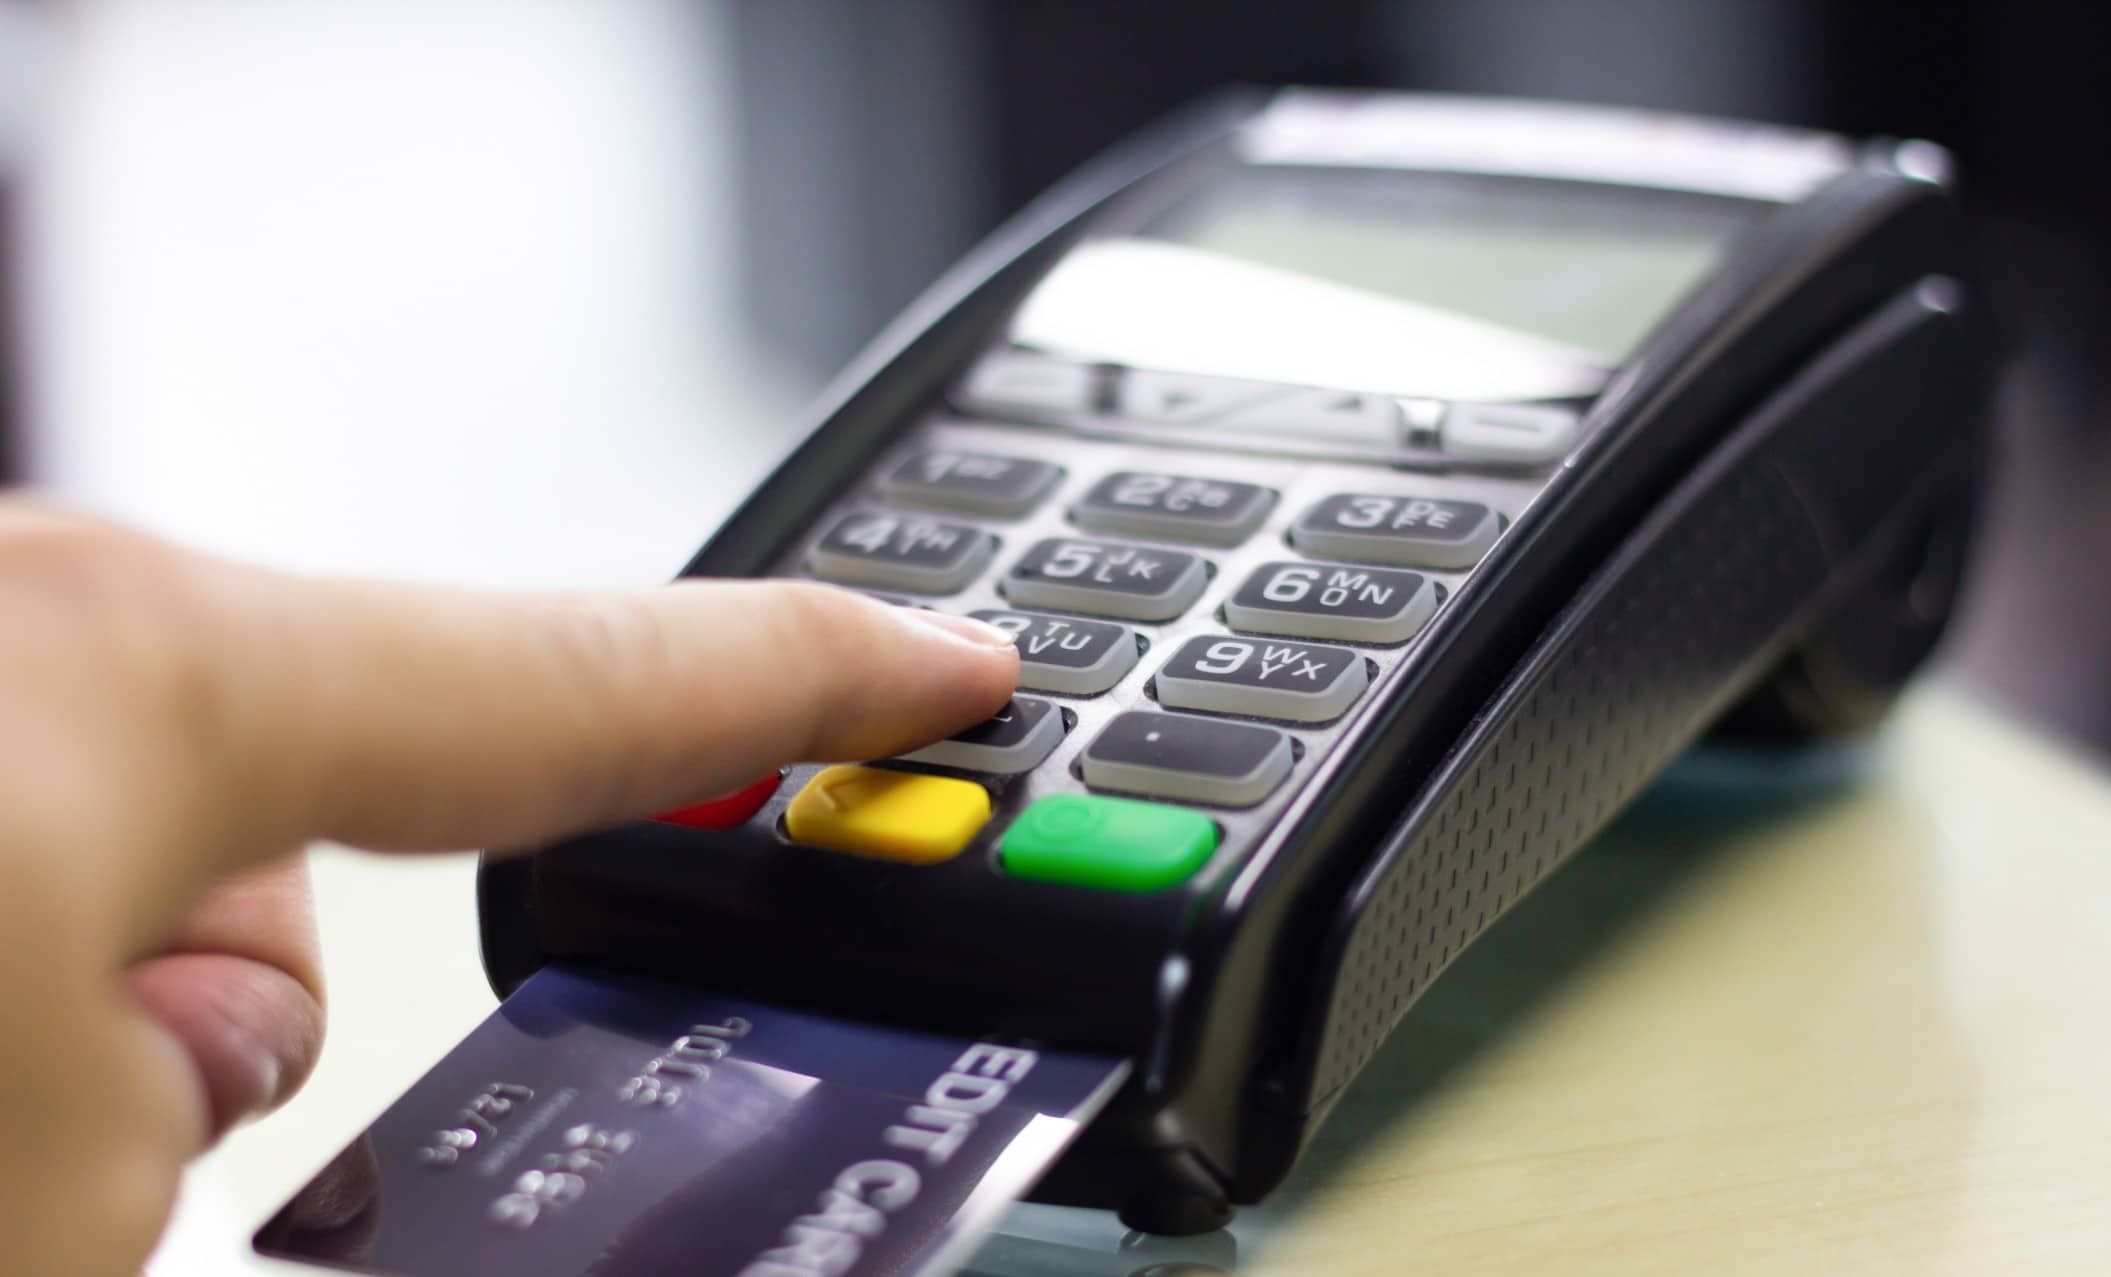 How Do Credit Card Readers Work